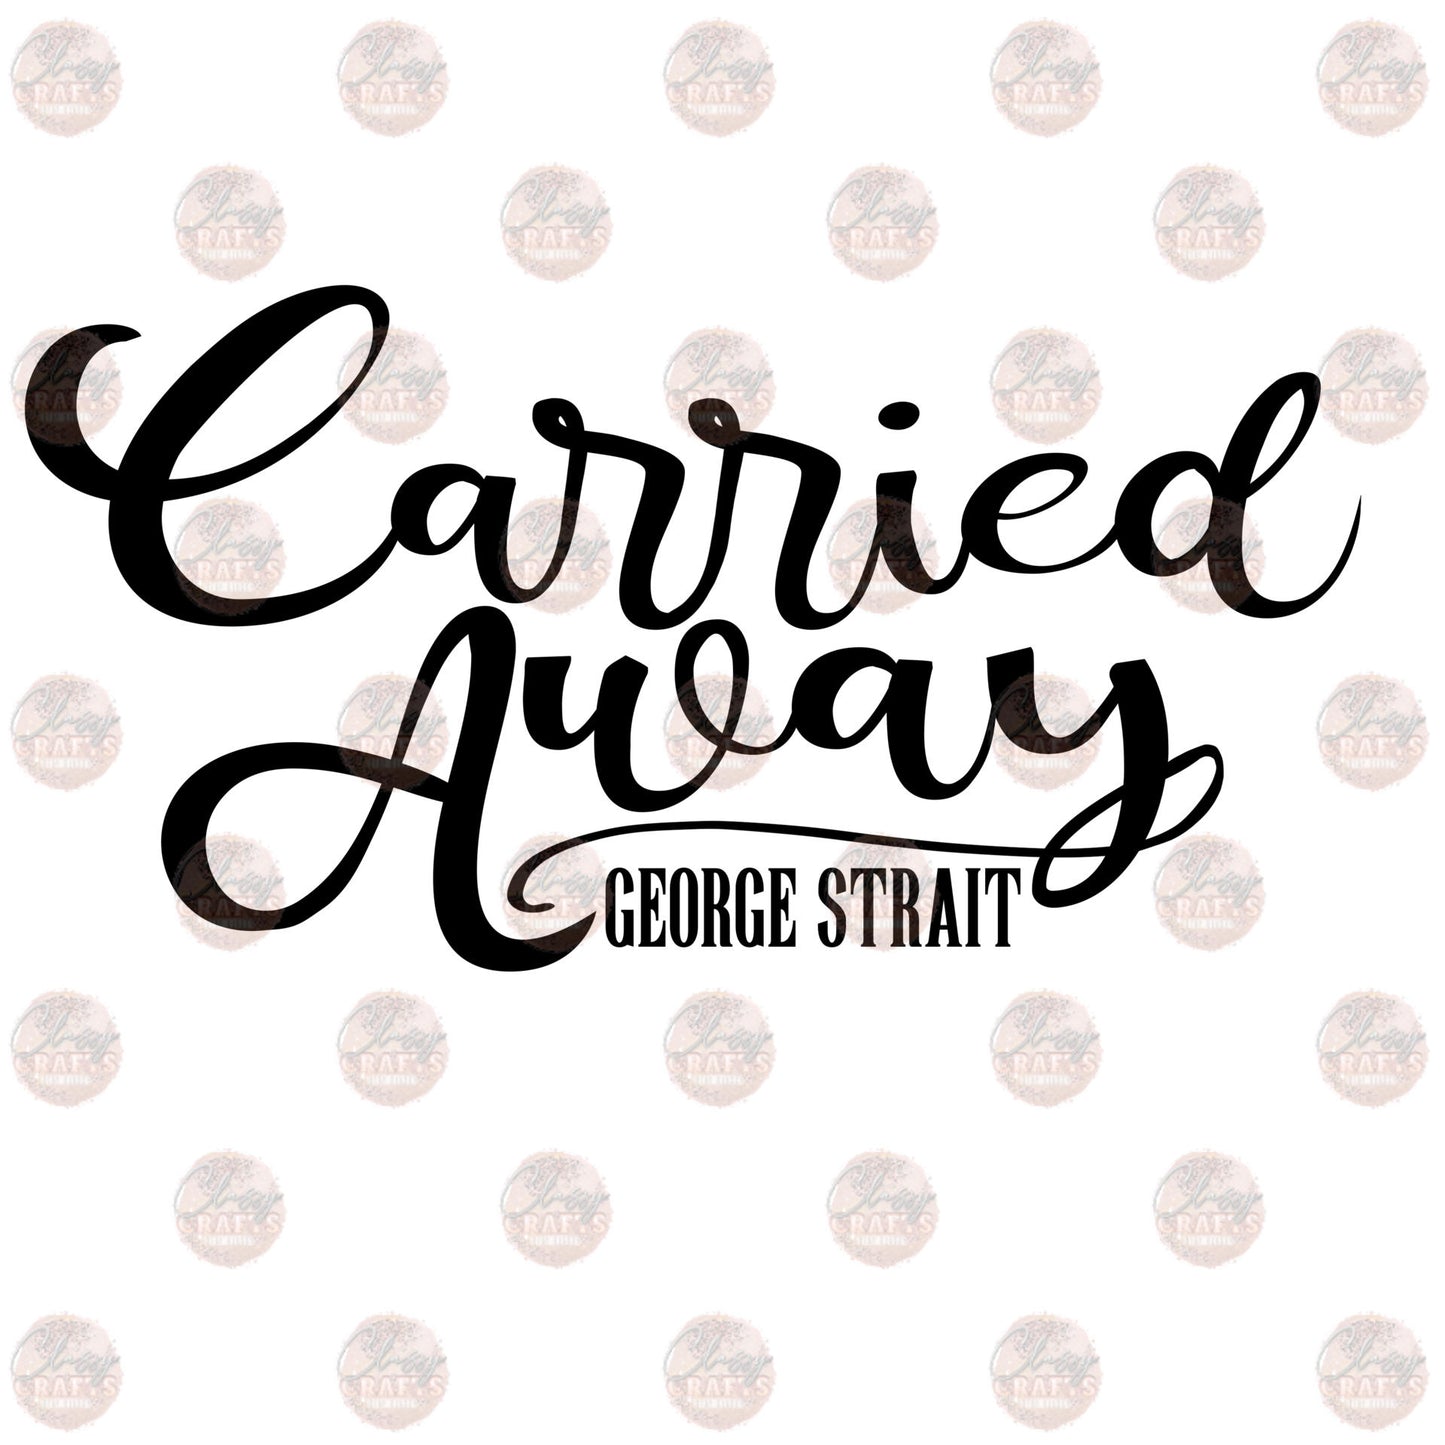 Carried Away - Sublimation Transfer